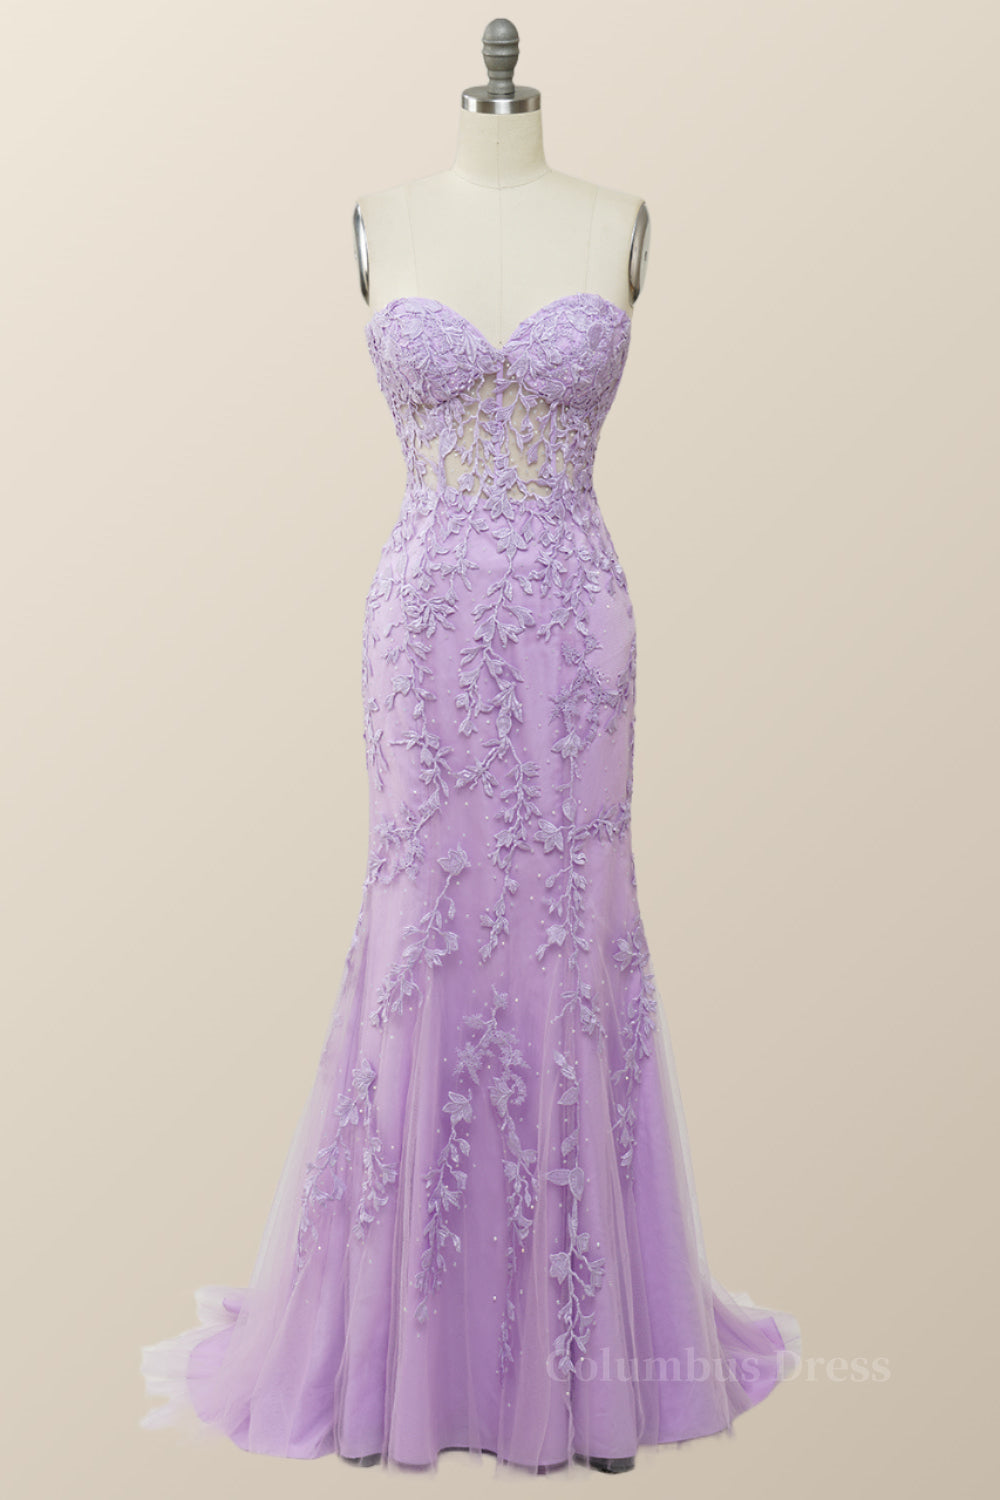 Sweetheart Lavender Lace Mermaid Long Corset Prom Dress outfits, Party Dress Shop Near Me